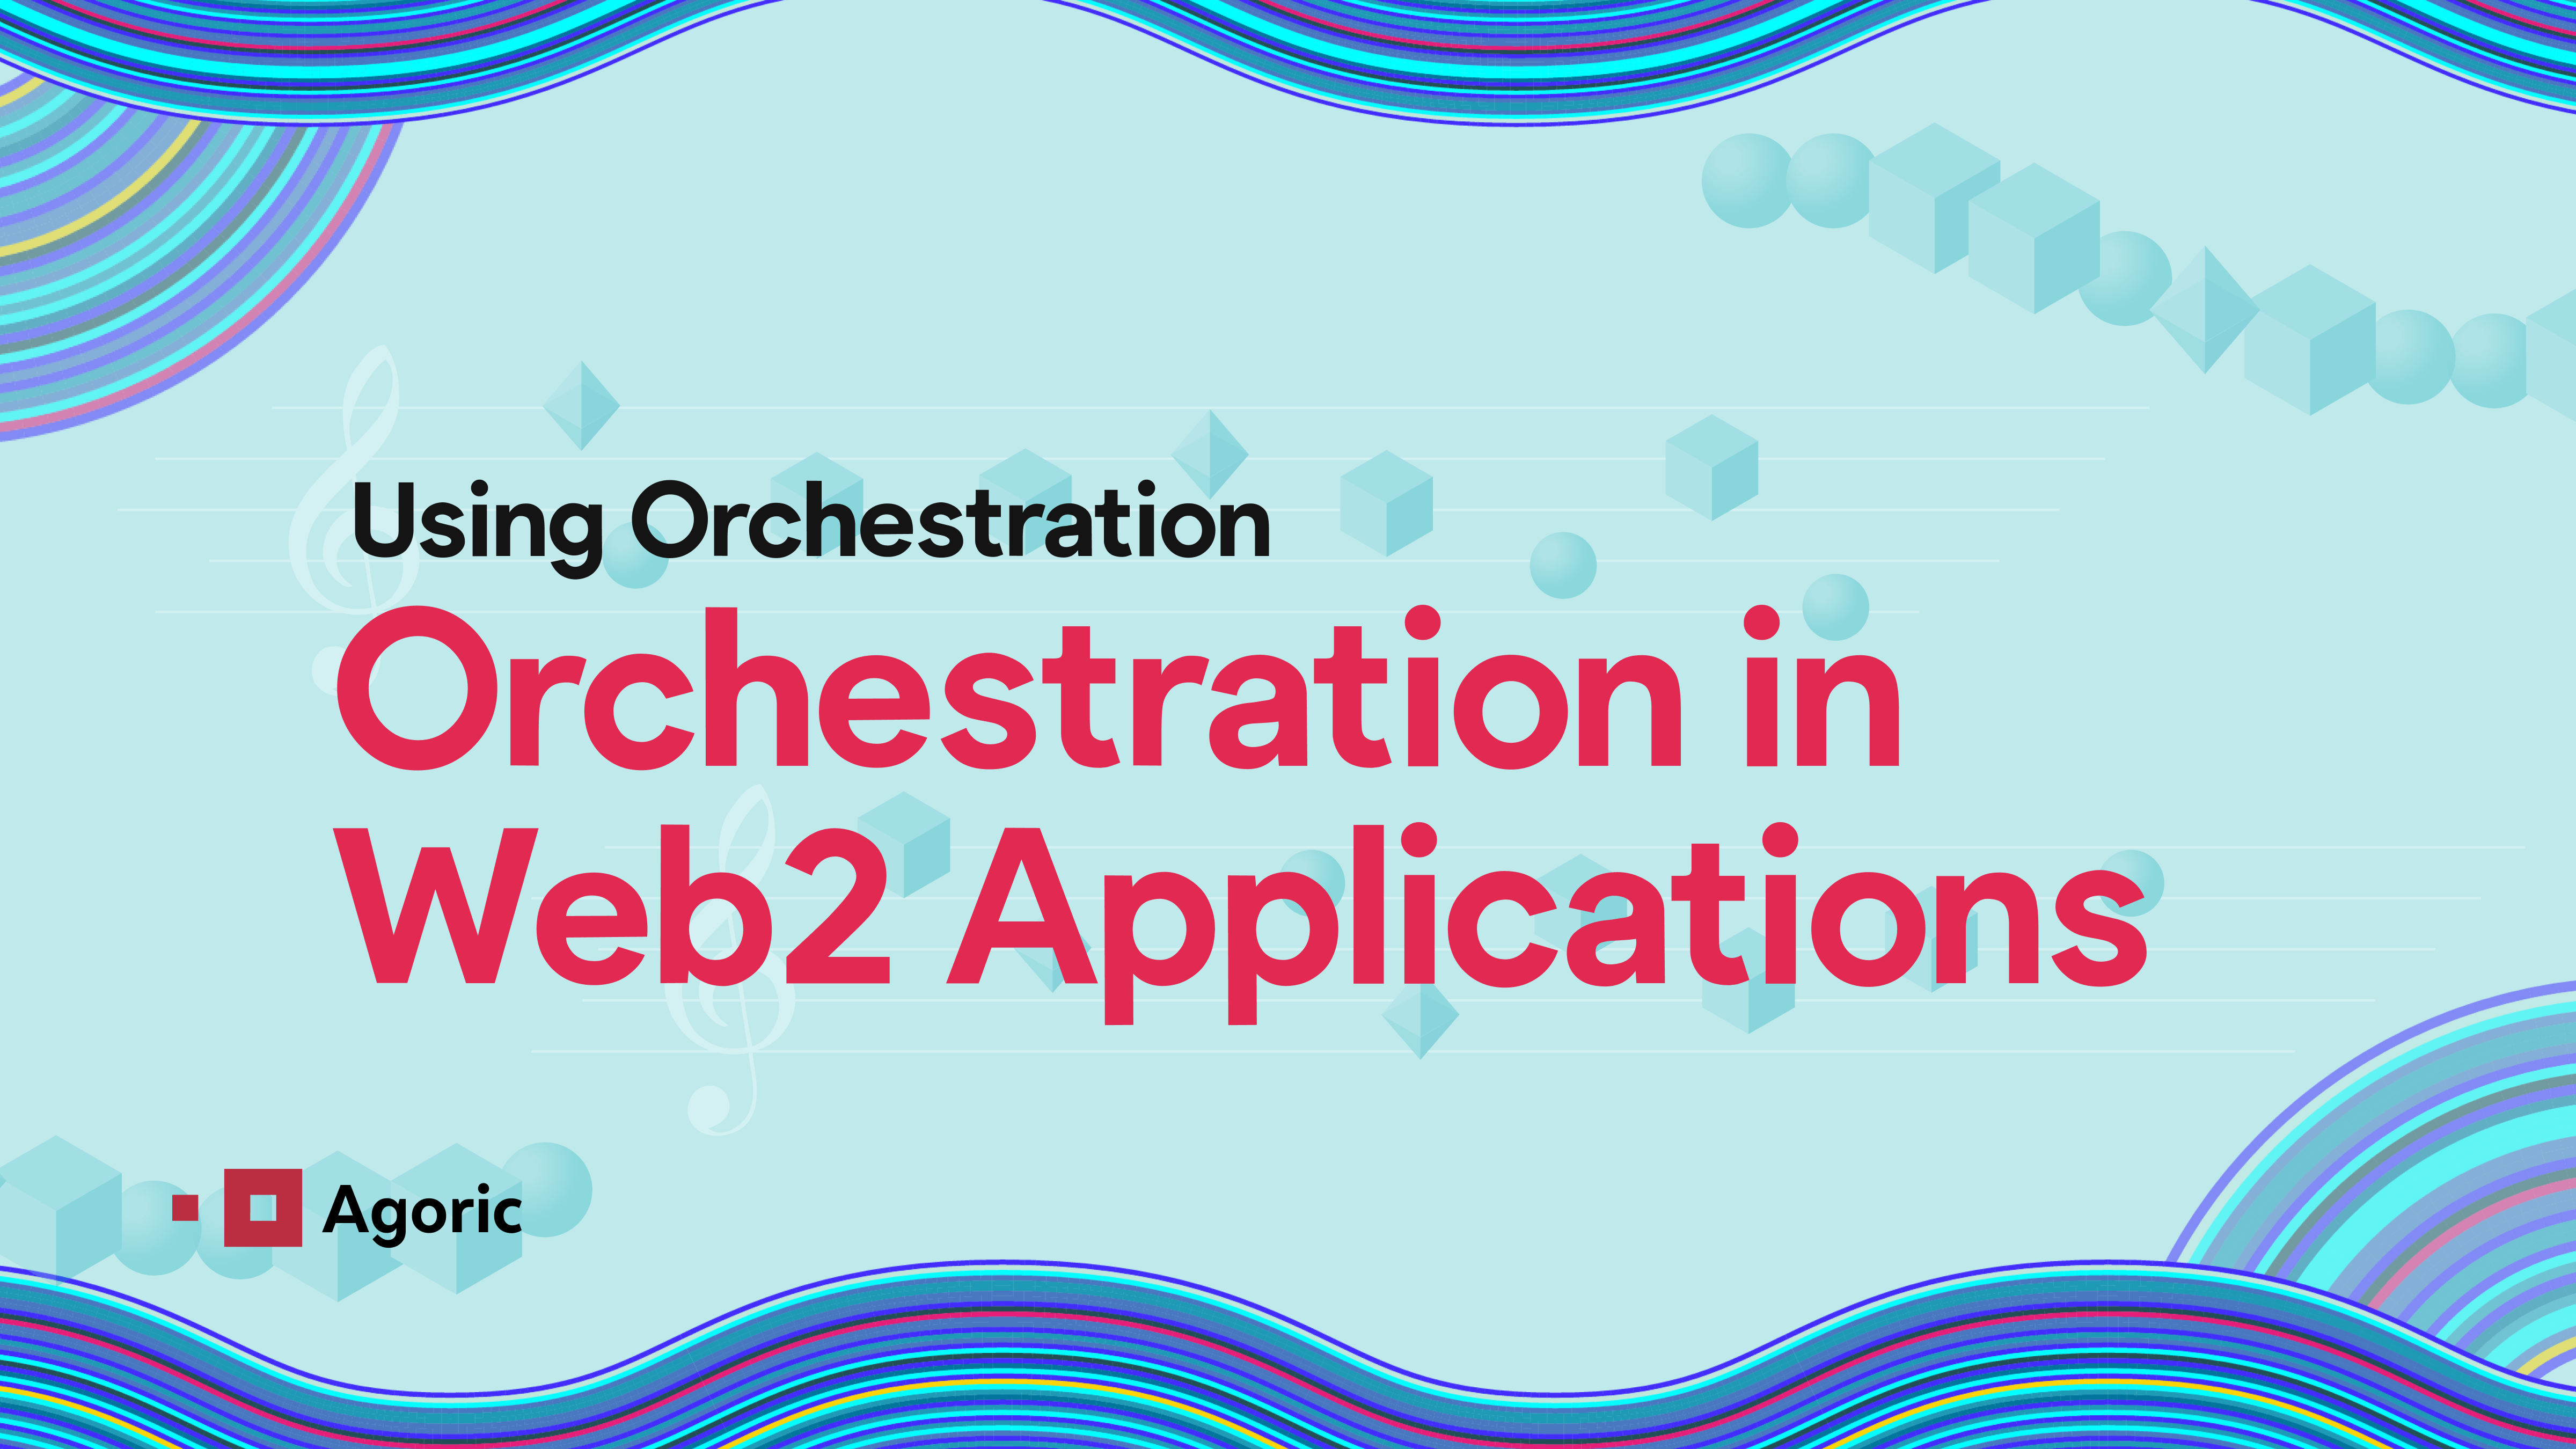 Using Orchestration: Orchestration in Web2 Applications